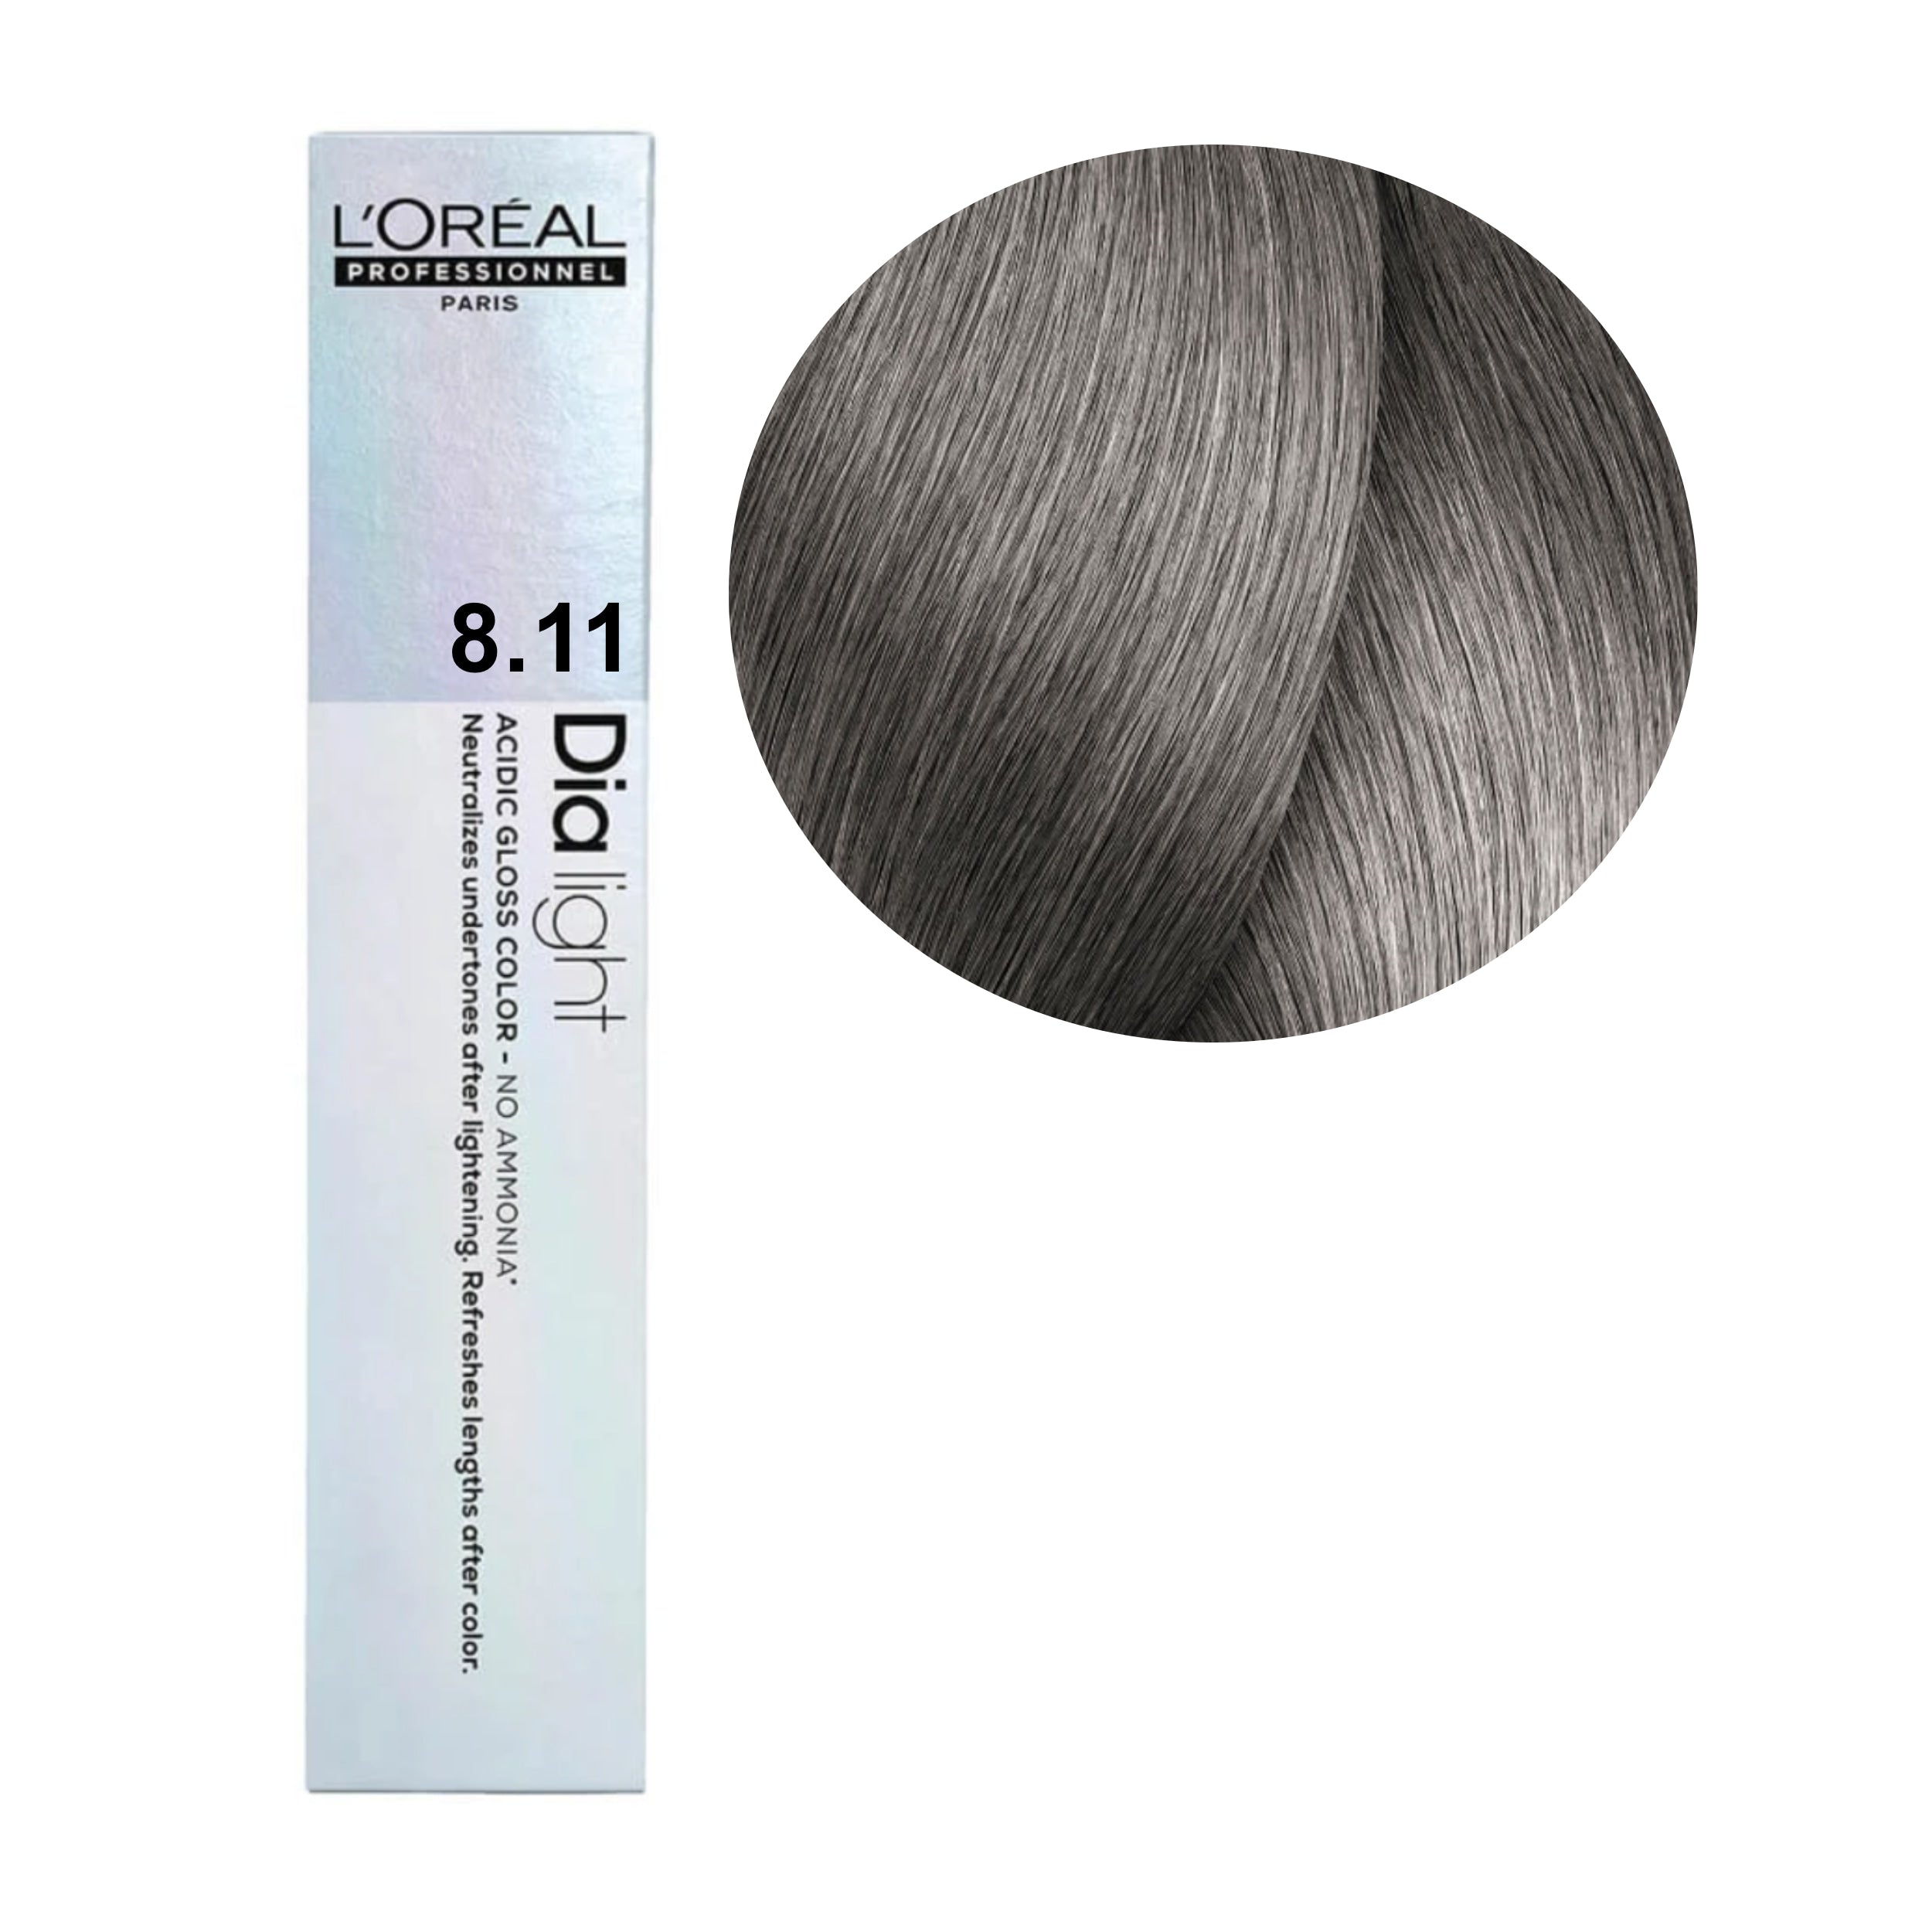 a tube of grey hair color on a white background